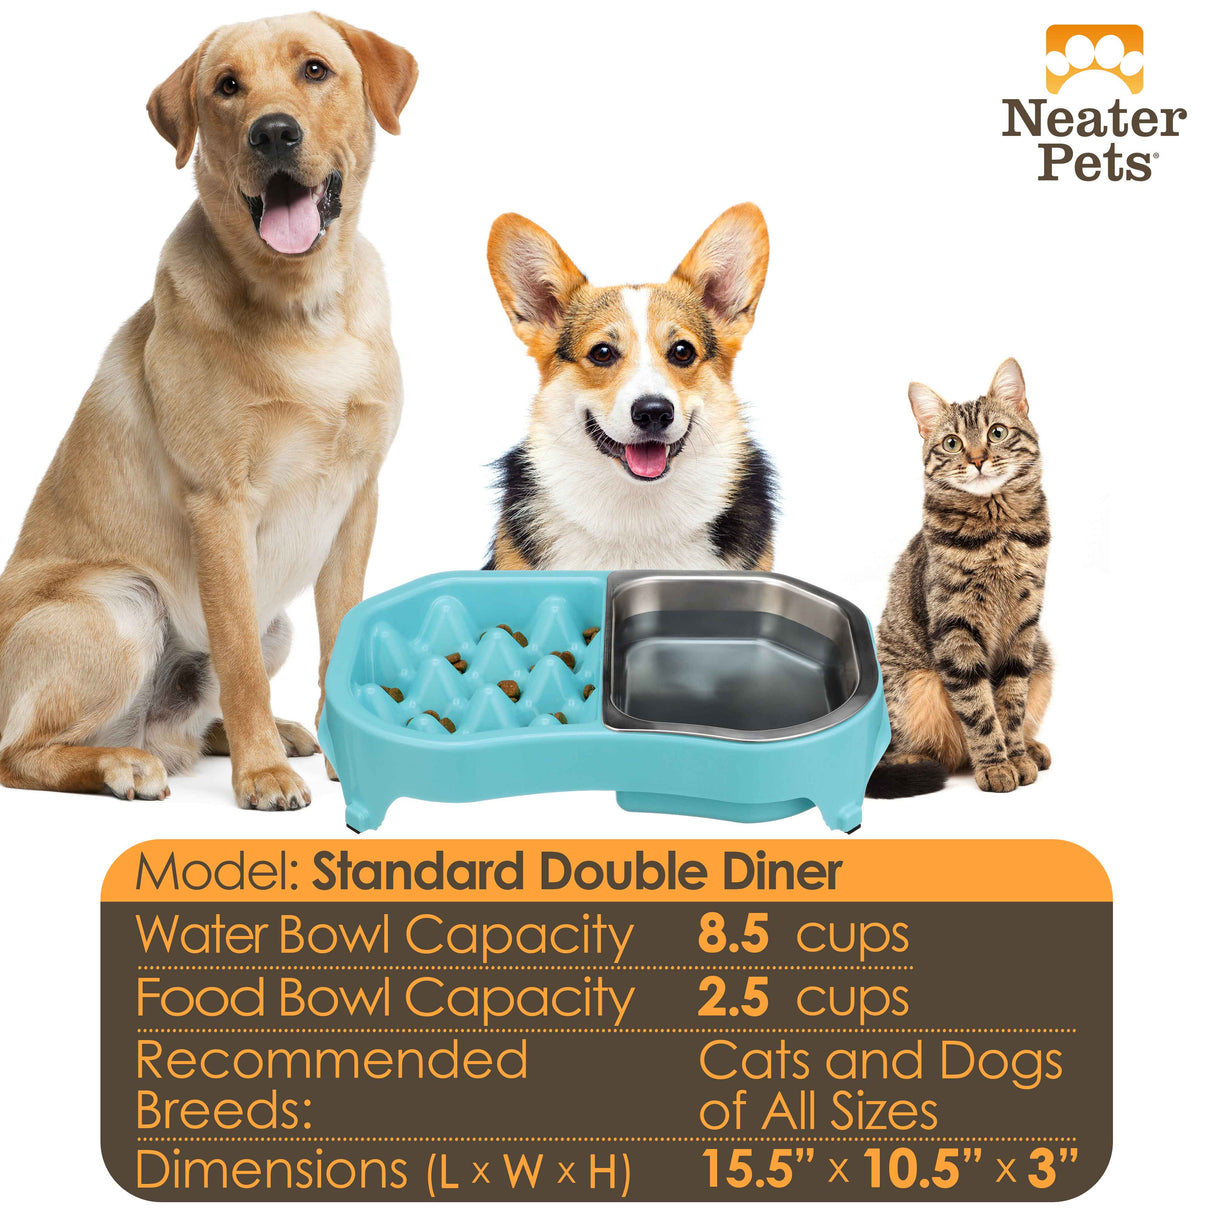 Neater Slow Feeder Double Diner in Aqua with stainless steel bowl insert bowl capacity and sizing chart